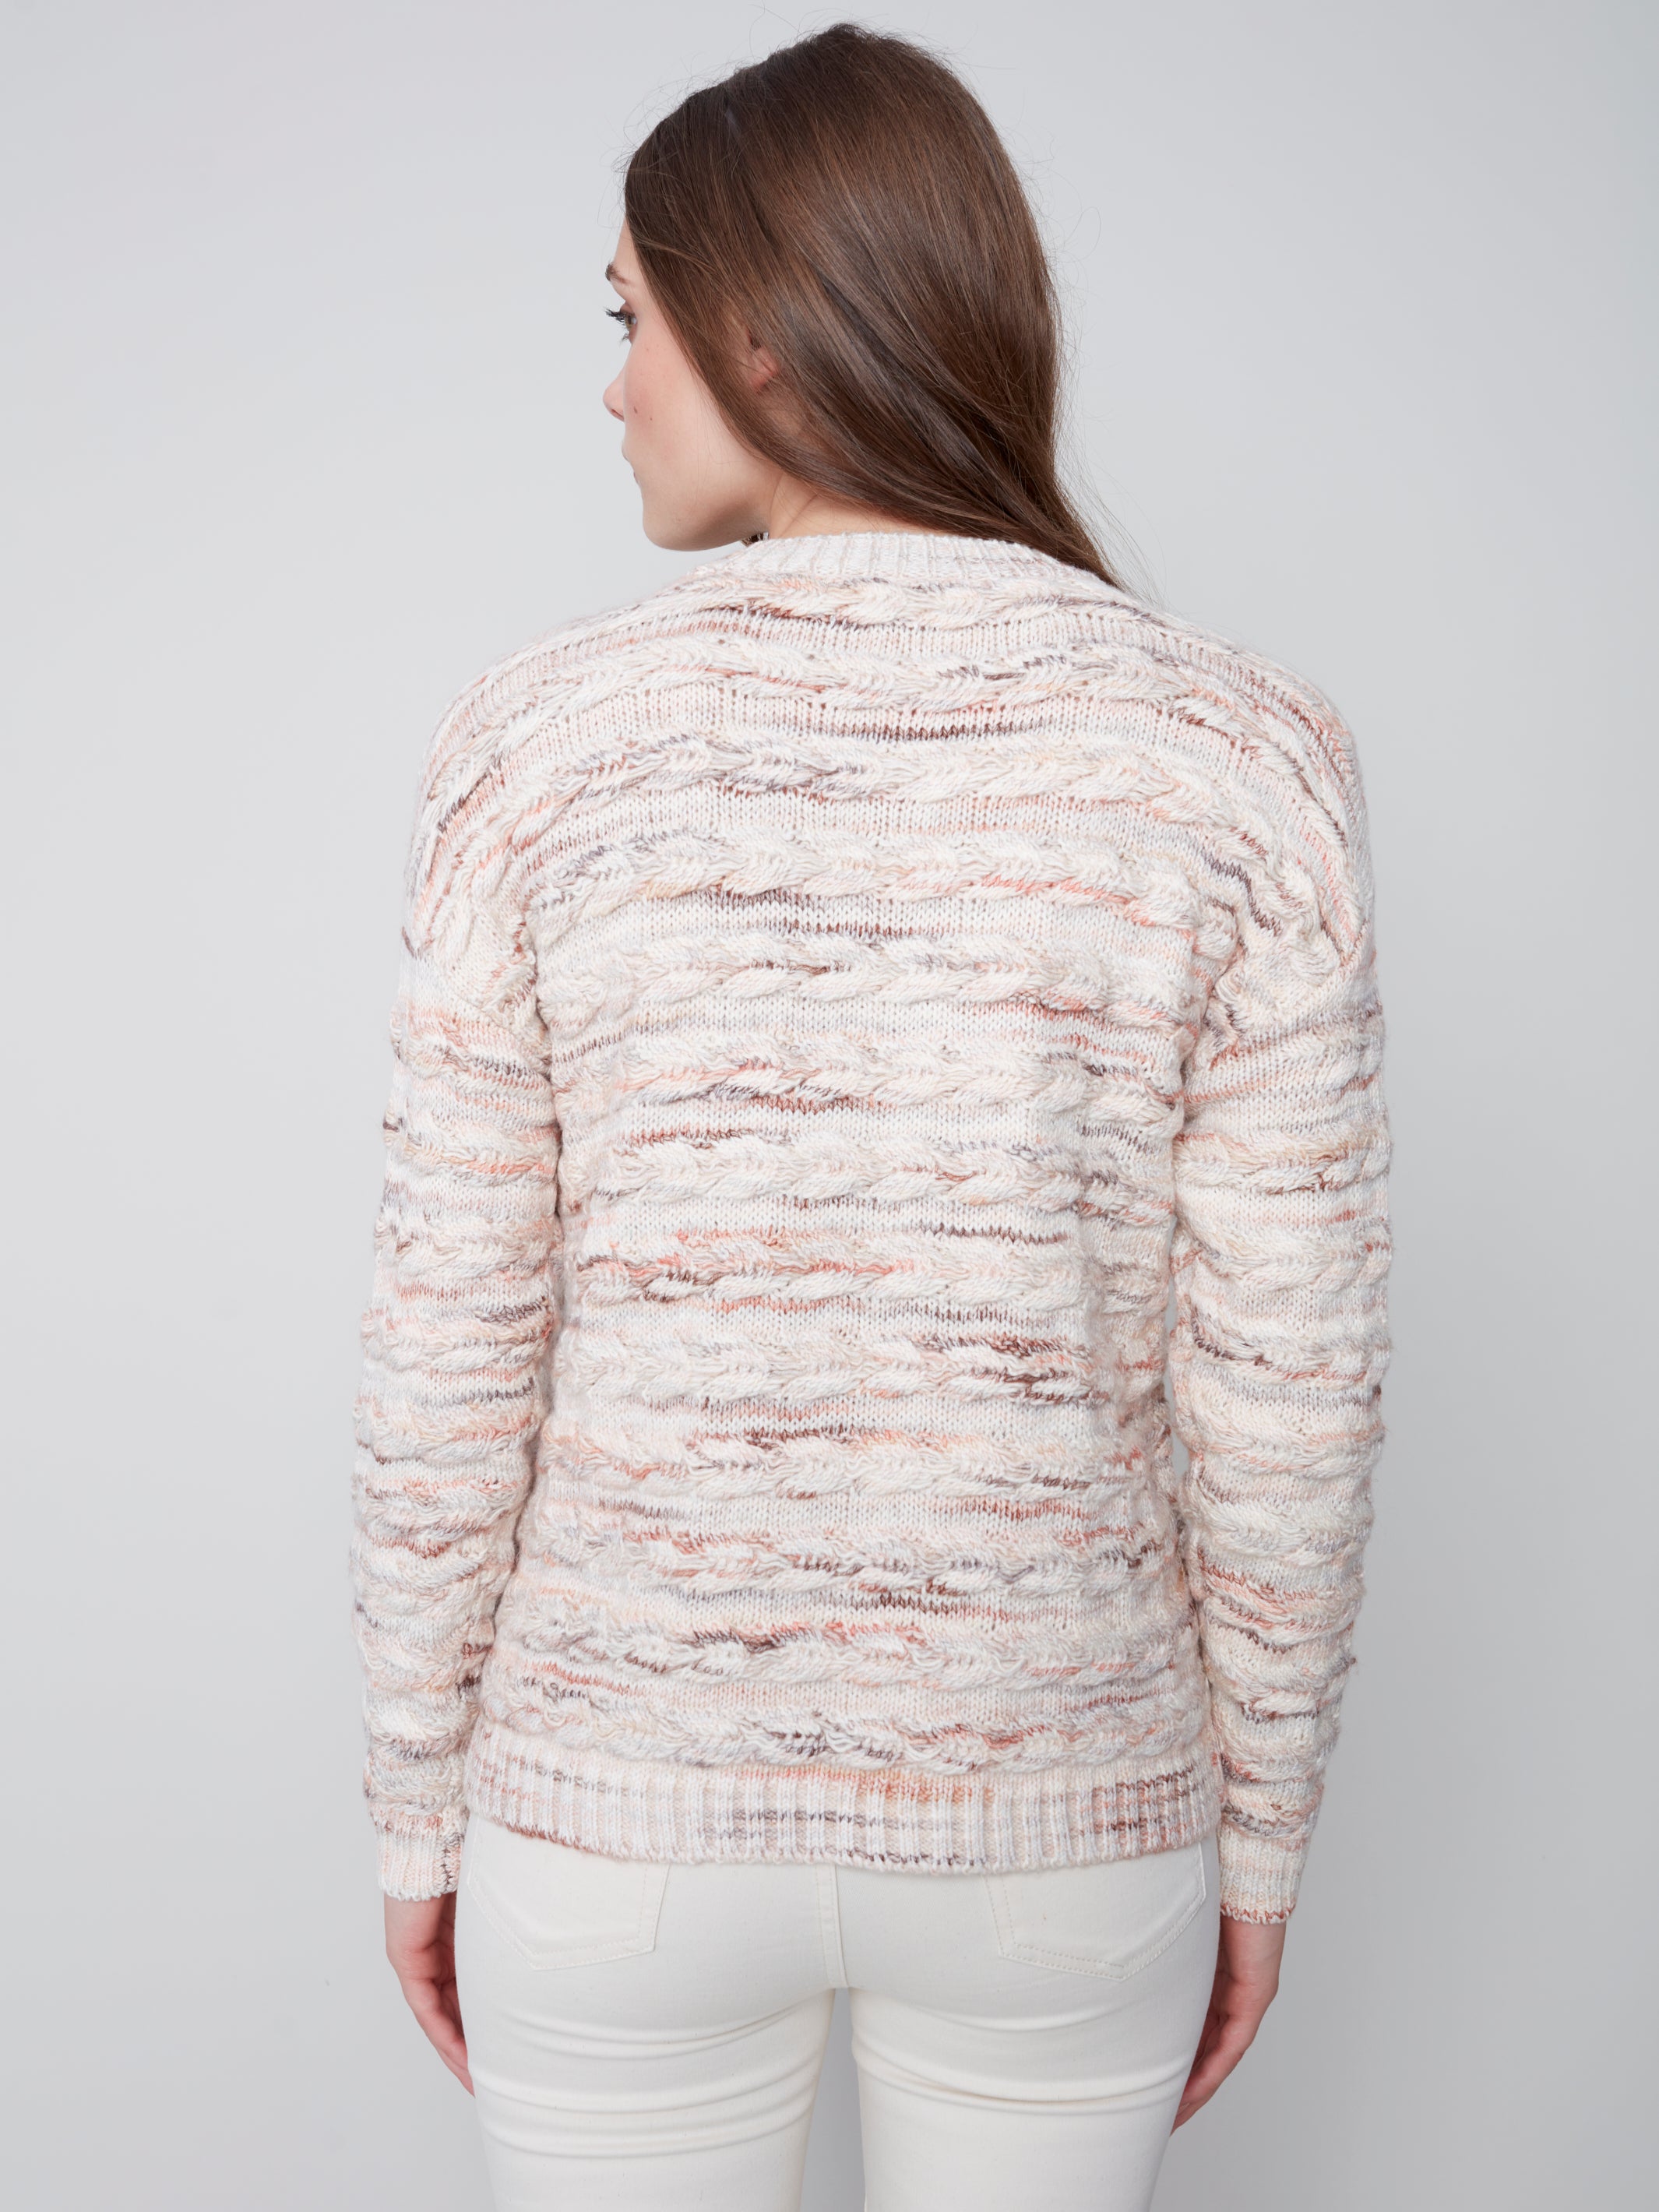 Horizontal Cable Design Sweater by Charlie B